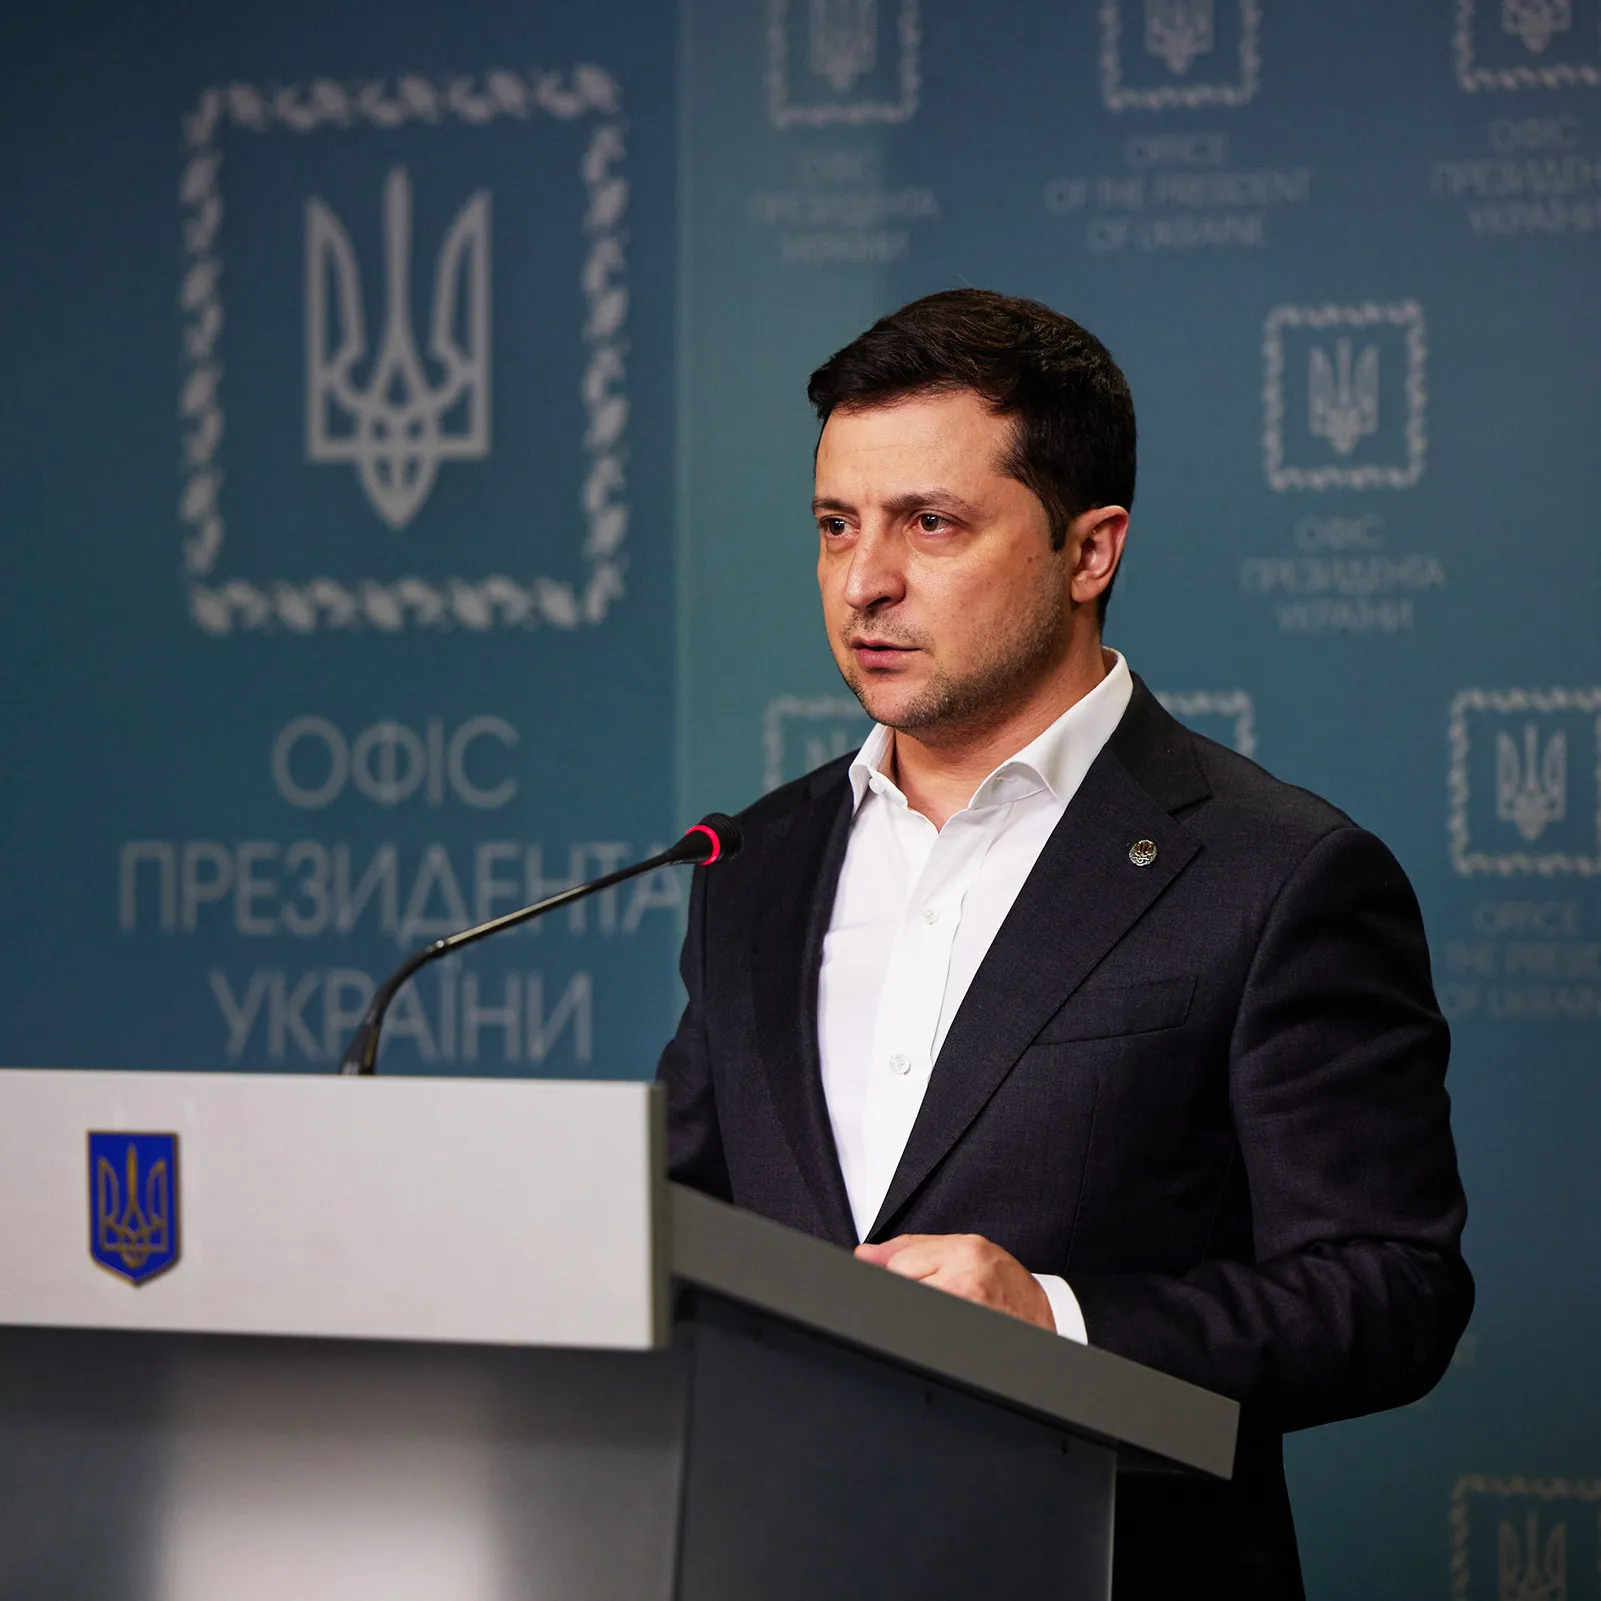 How did the iconic figure Volodymyr Zelensky tackle Ukraine’s issues as the President